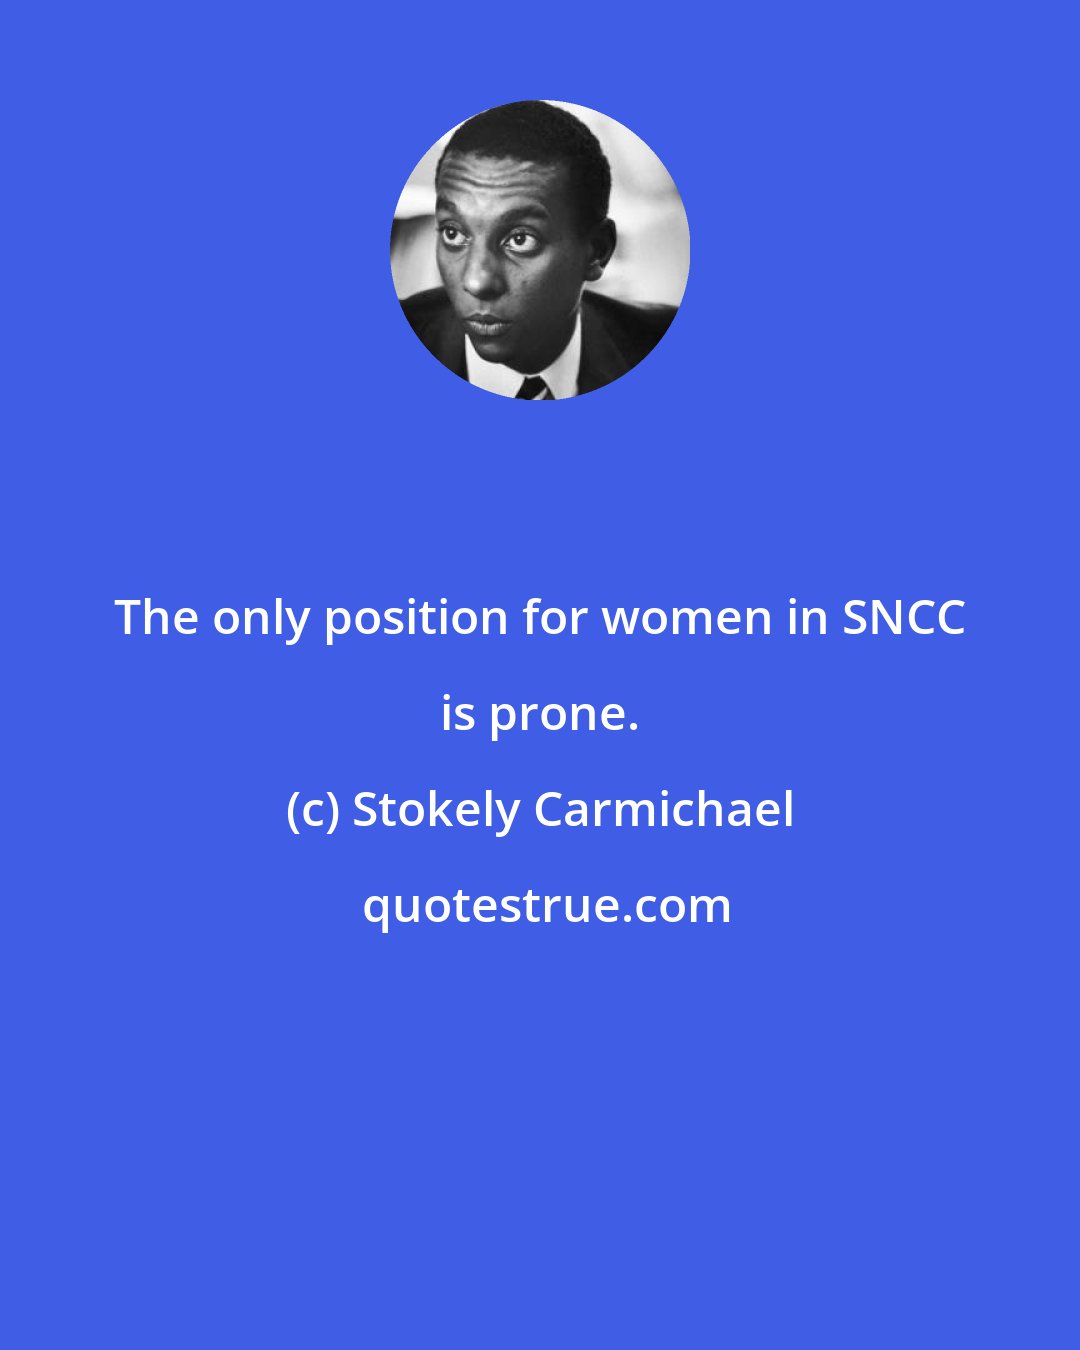 Stokely Carmichael: The only position for women in SNCC is prone.